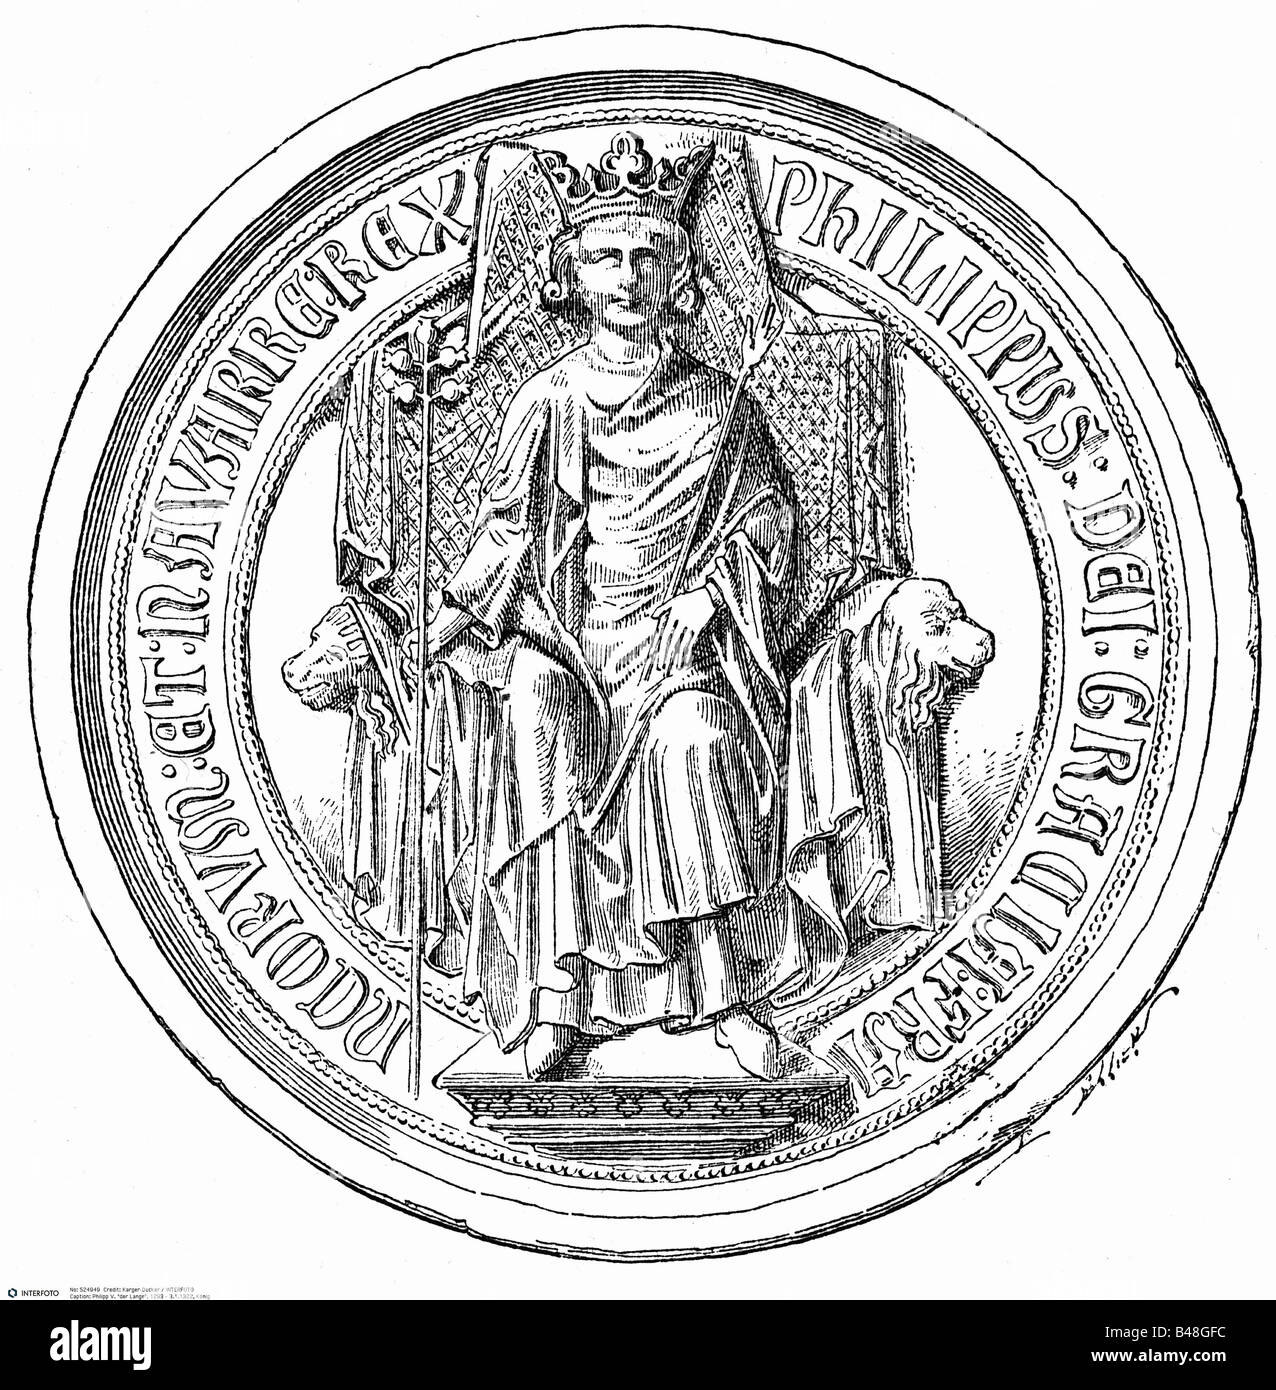 Philip V 'the Tall',  1293 - 3.1.1322, King of France 6.1.1317 - 3.1.1322, on the throne, wood engraving, 19th century, after seal, , Stock Photo